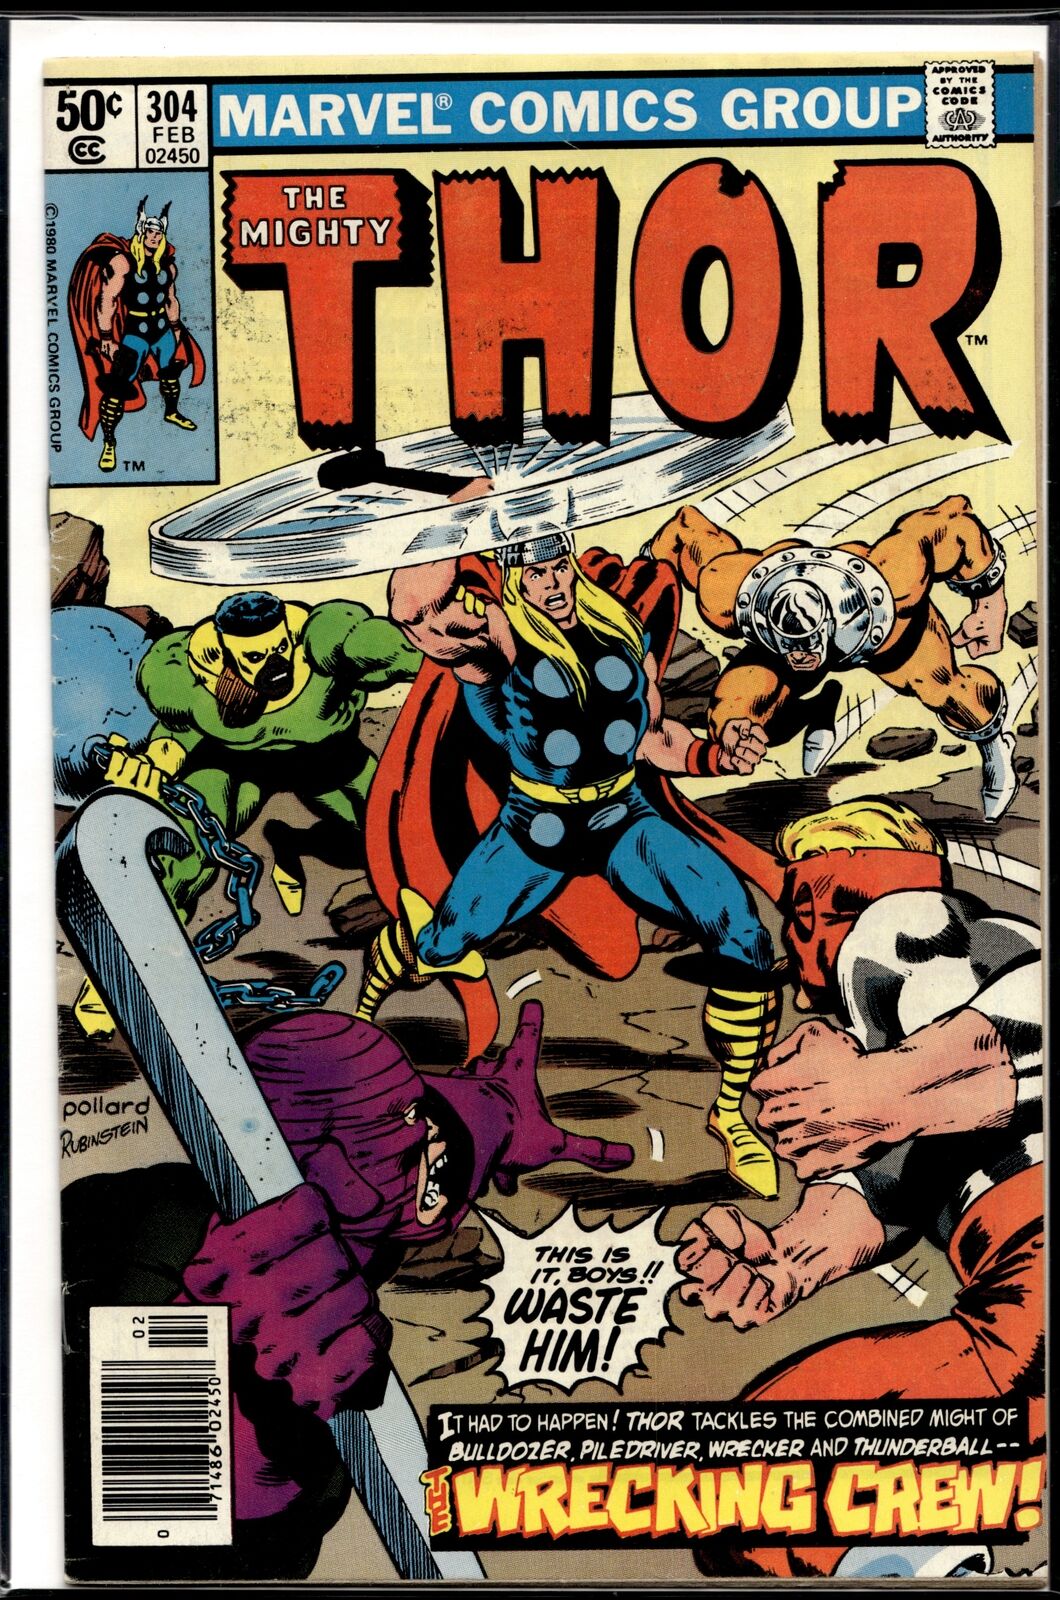 1981 Mighty Thor #304 Newsstand Marvel Comic